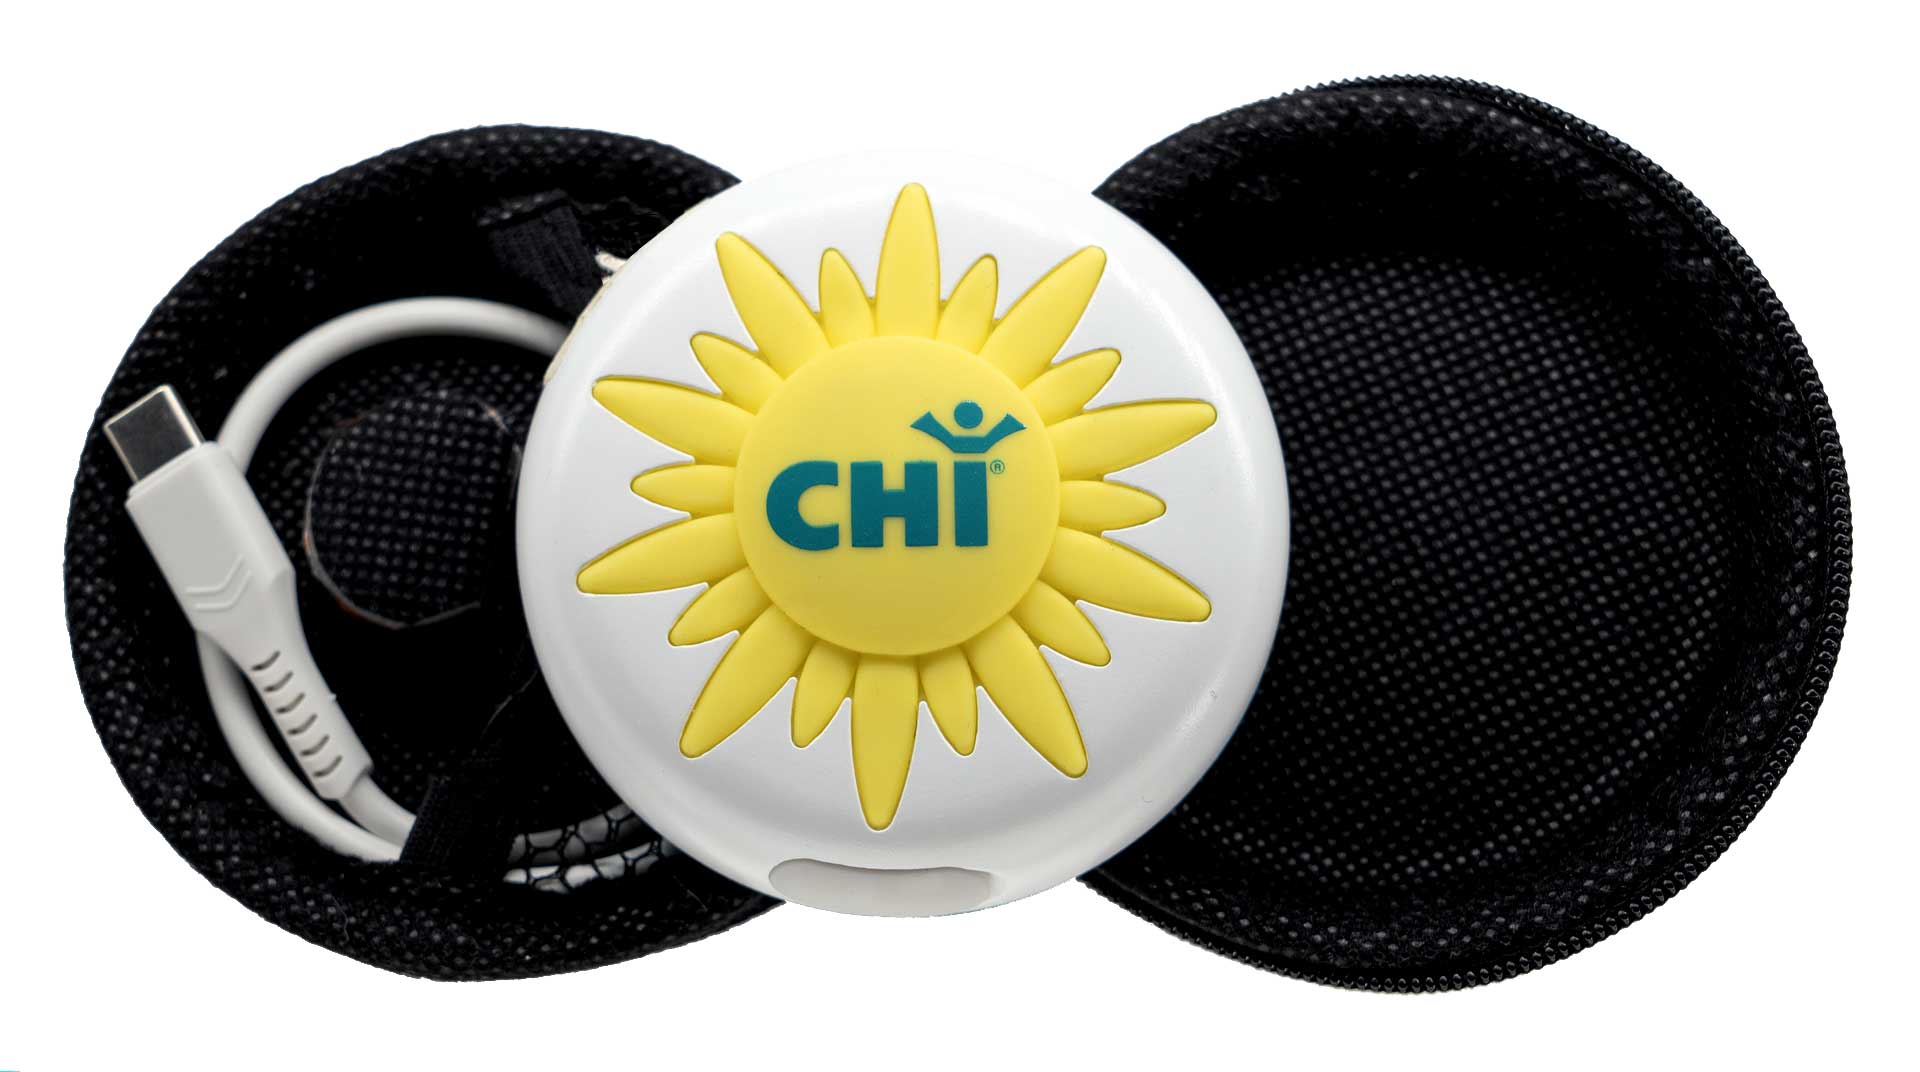 CHI Sun in Case with Charging Unit & Cable